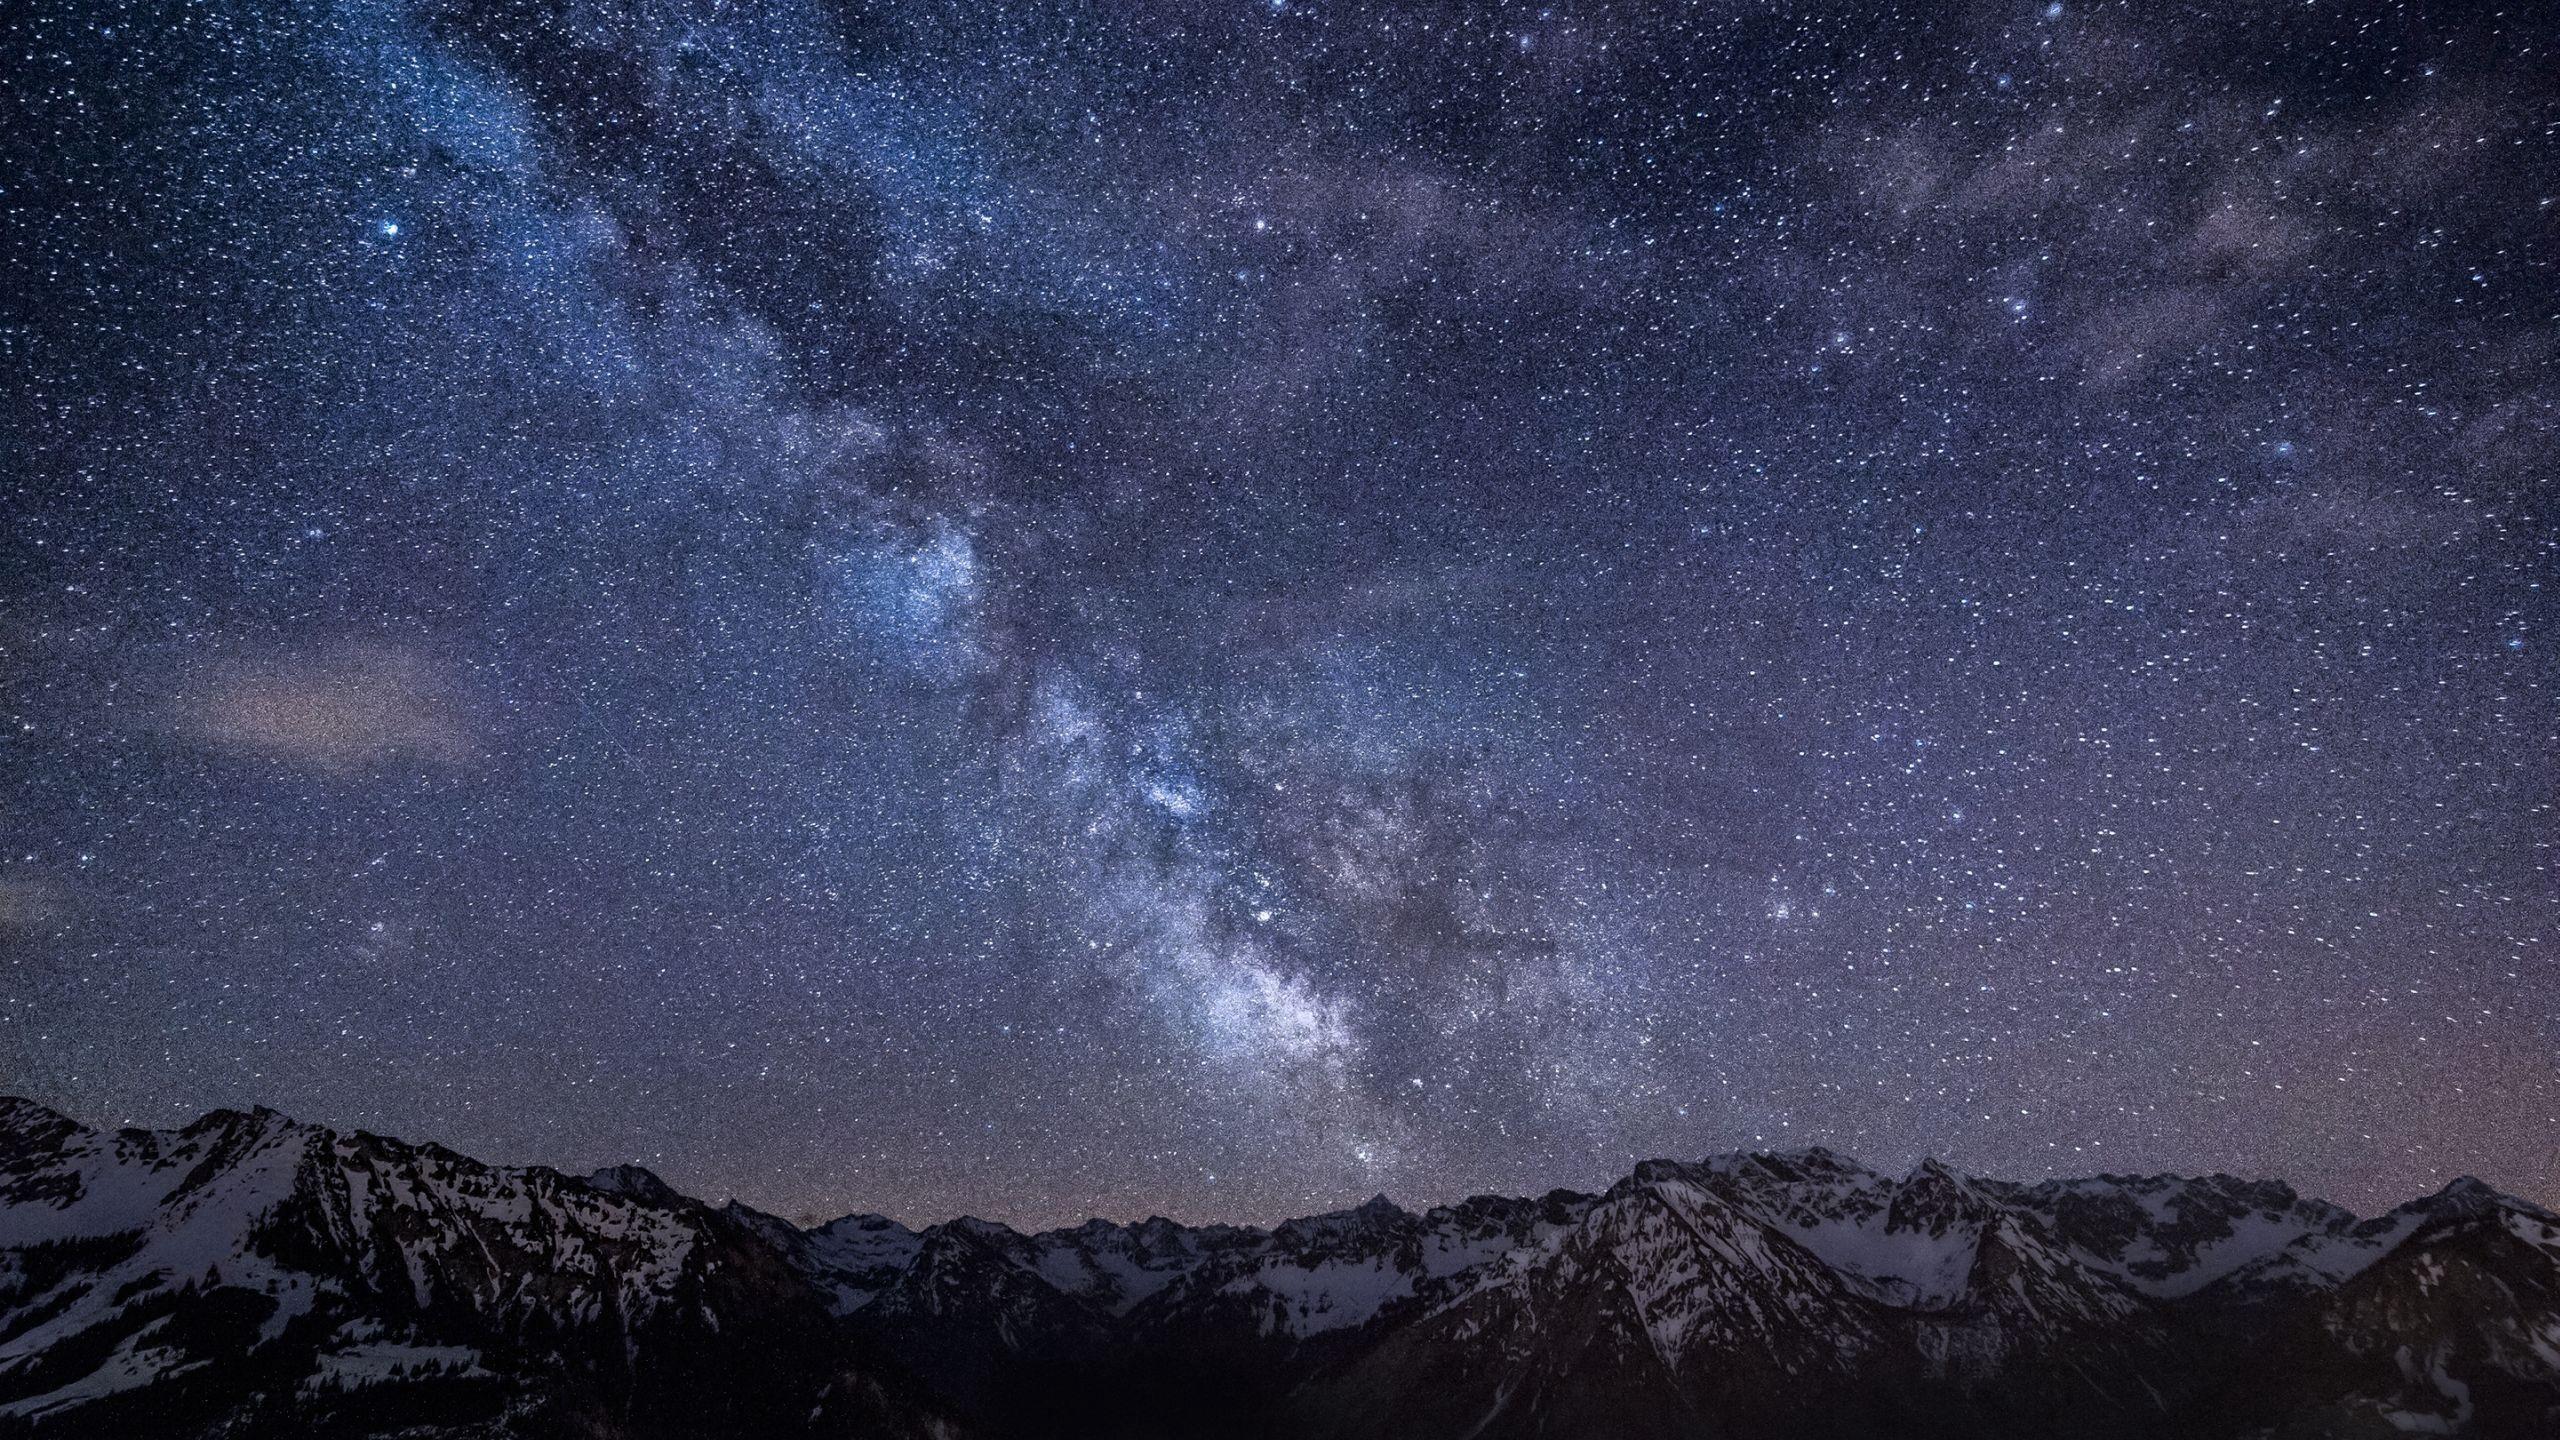 Wallpaper ID 4426  mountains starry sky night 4k free download